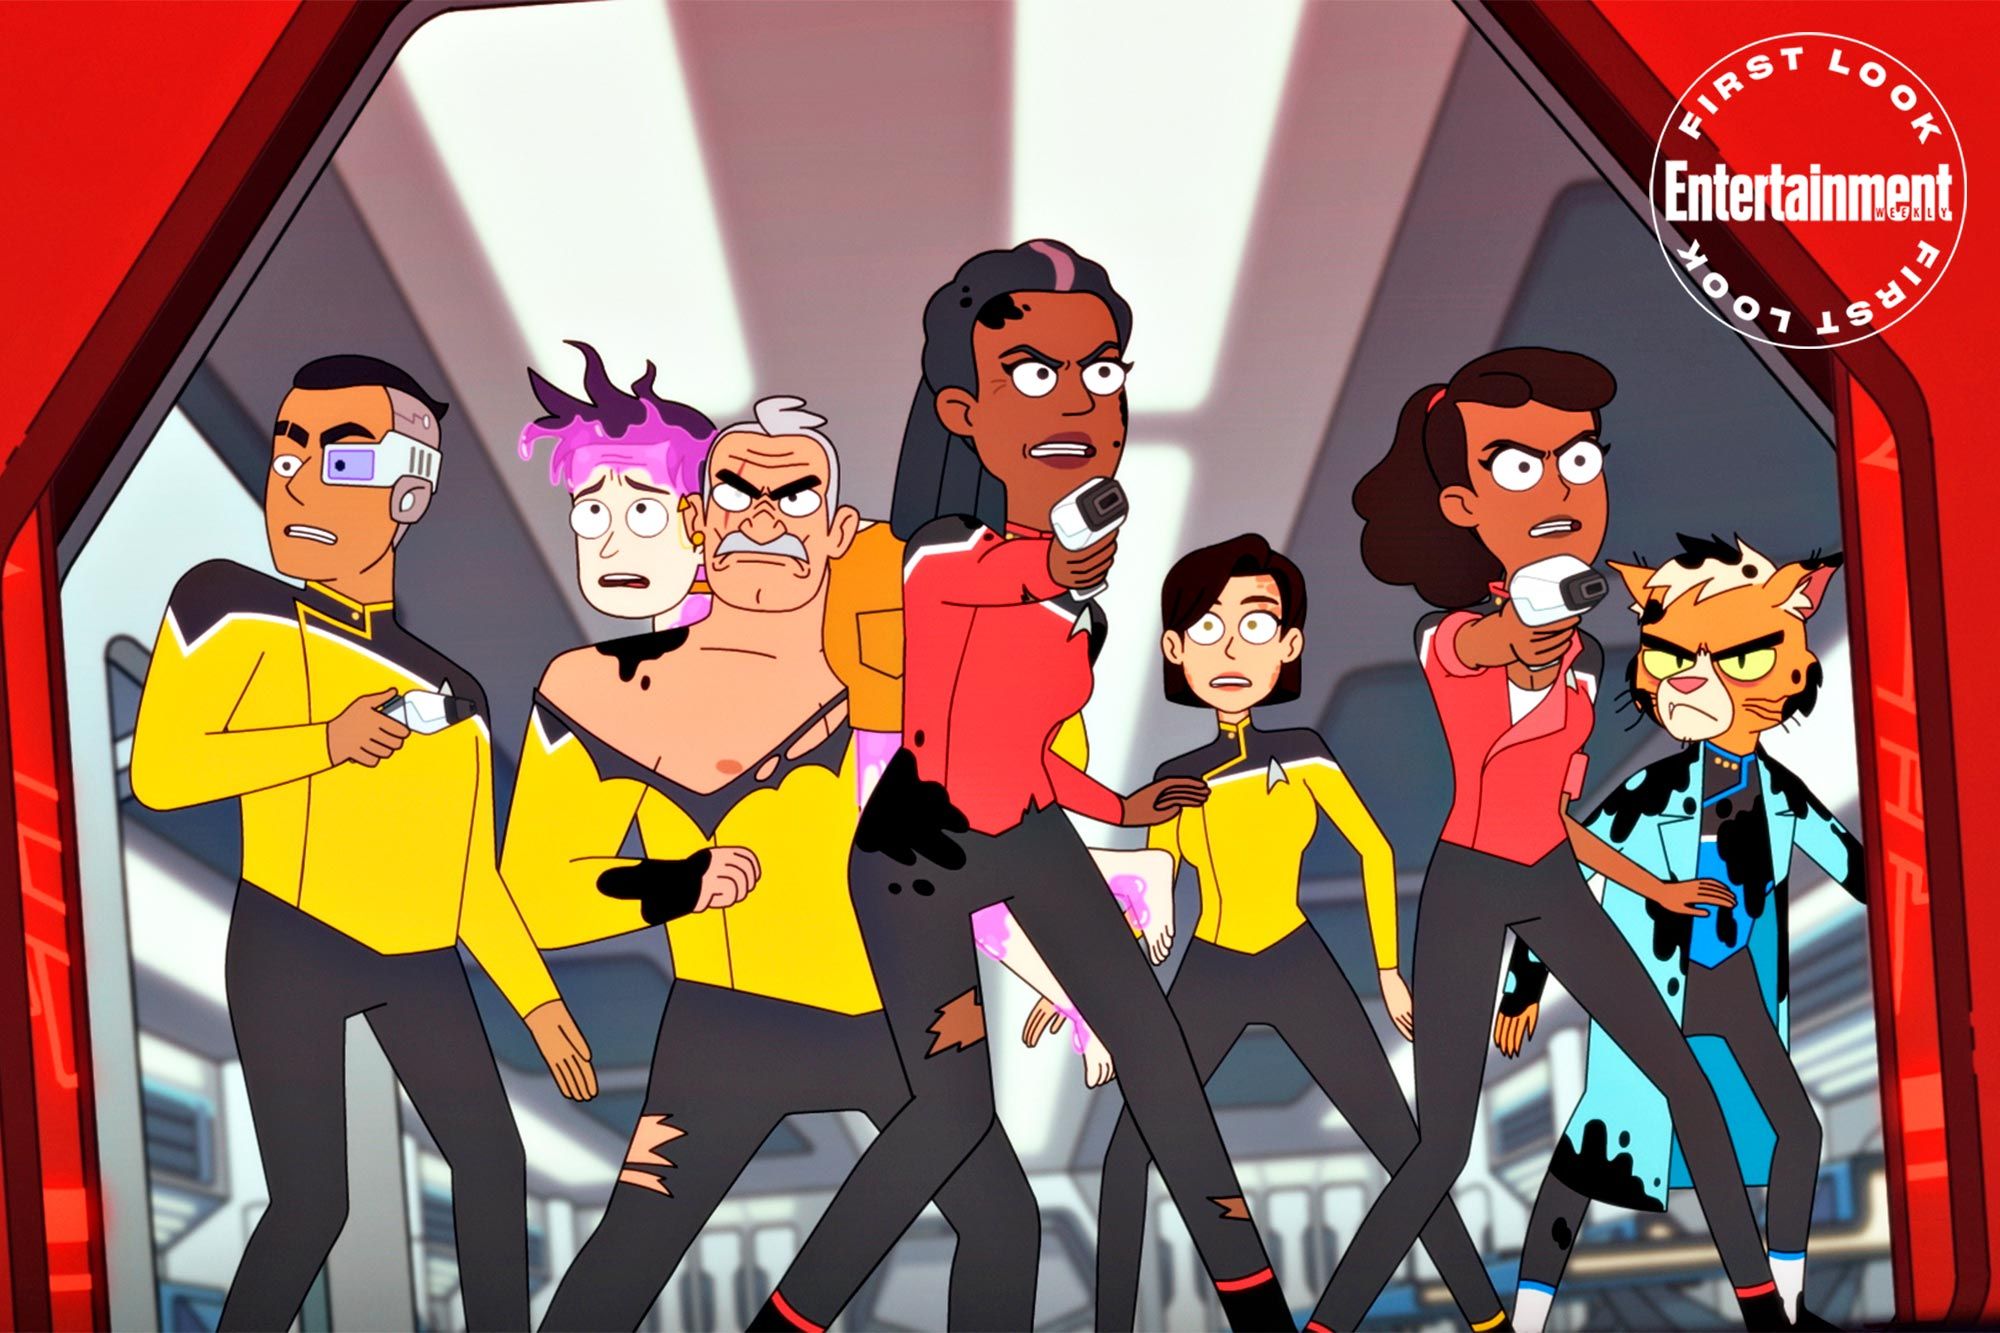 New 'Star Trek: Lower Decks' Details And Image, Plus Hints At 'Next Gen' Cameos